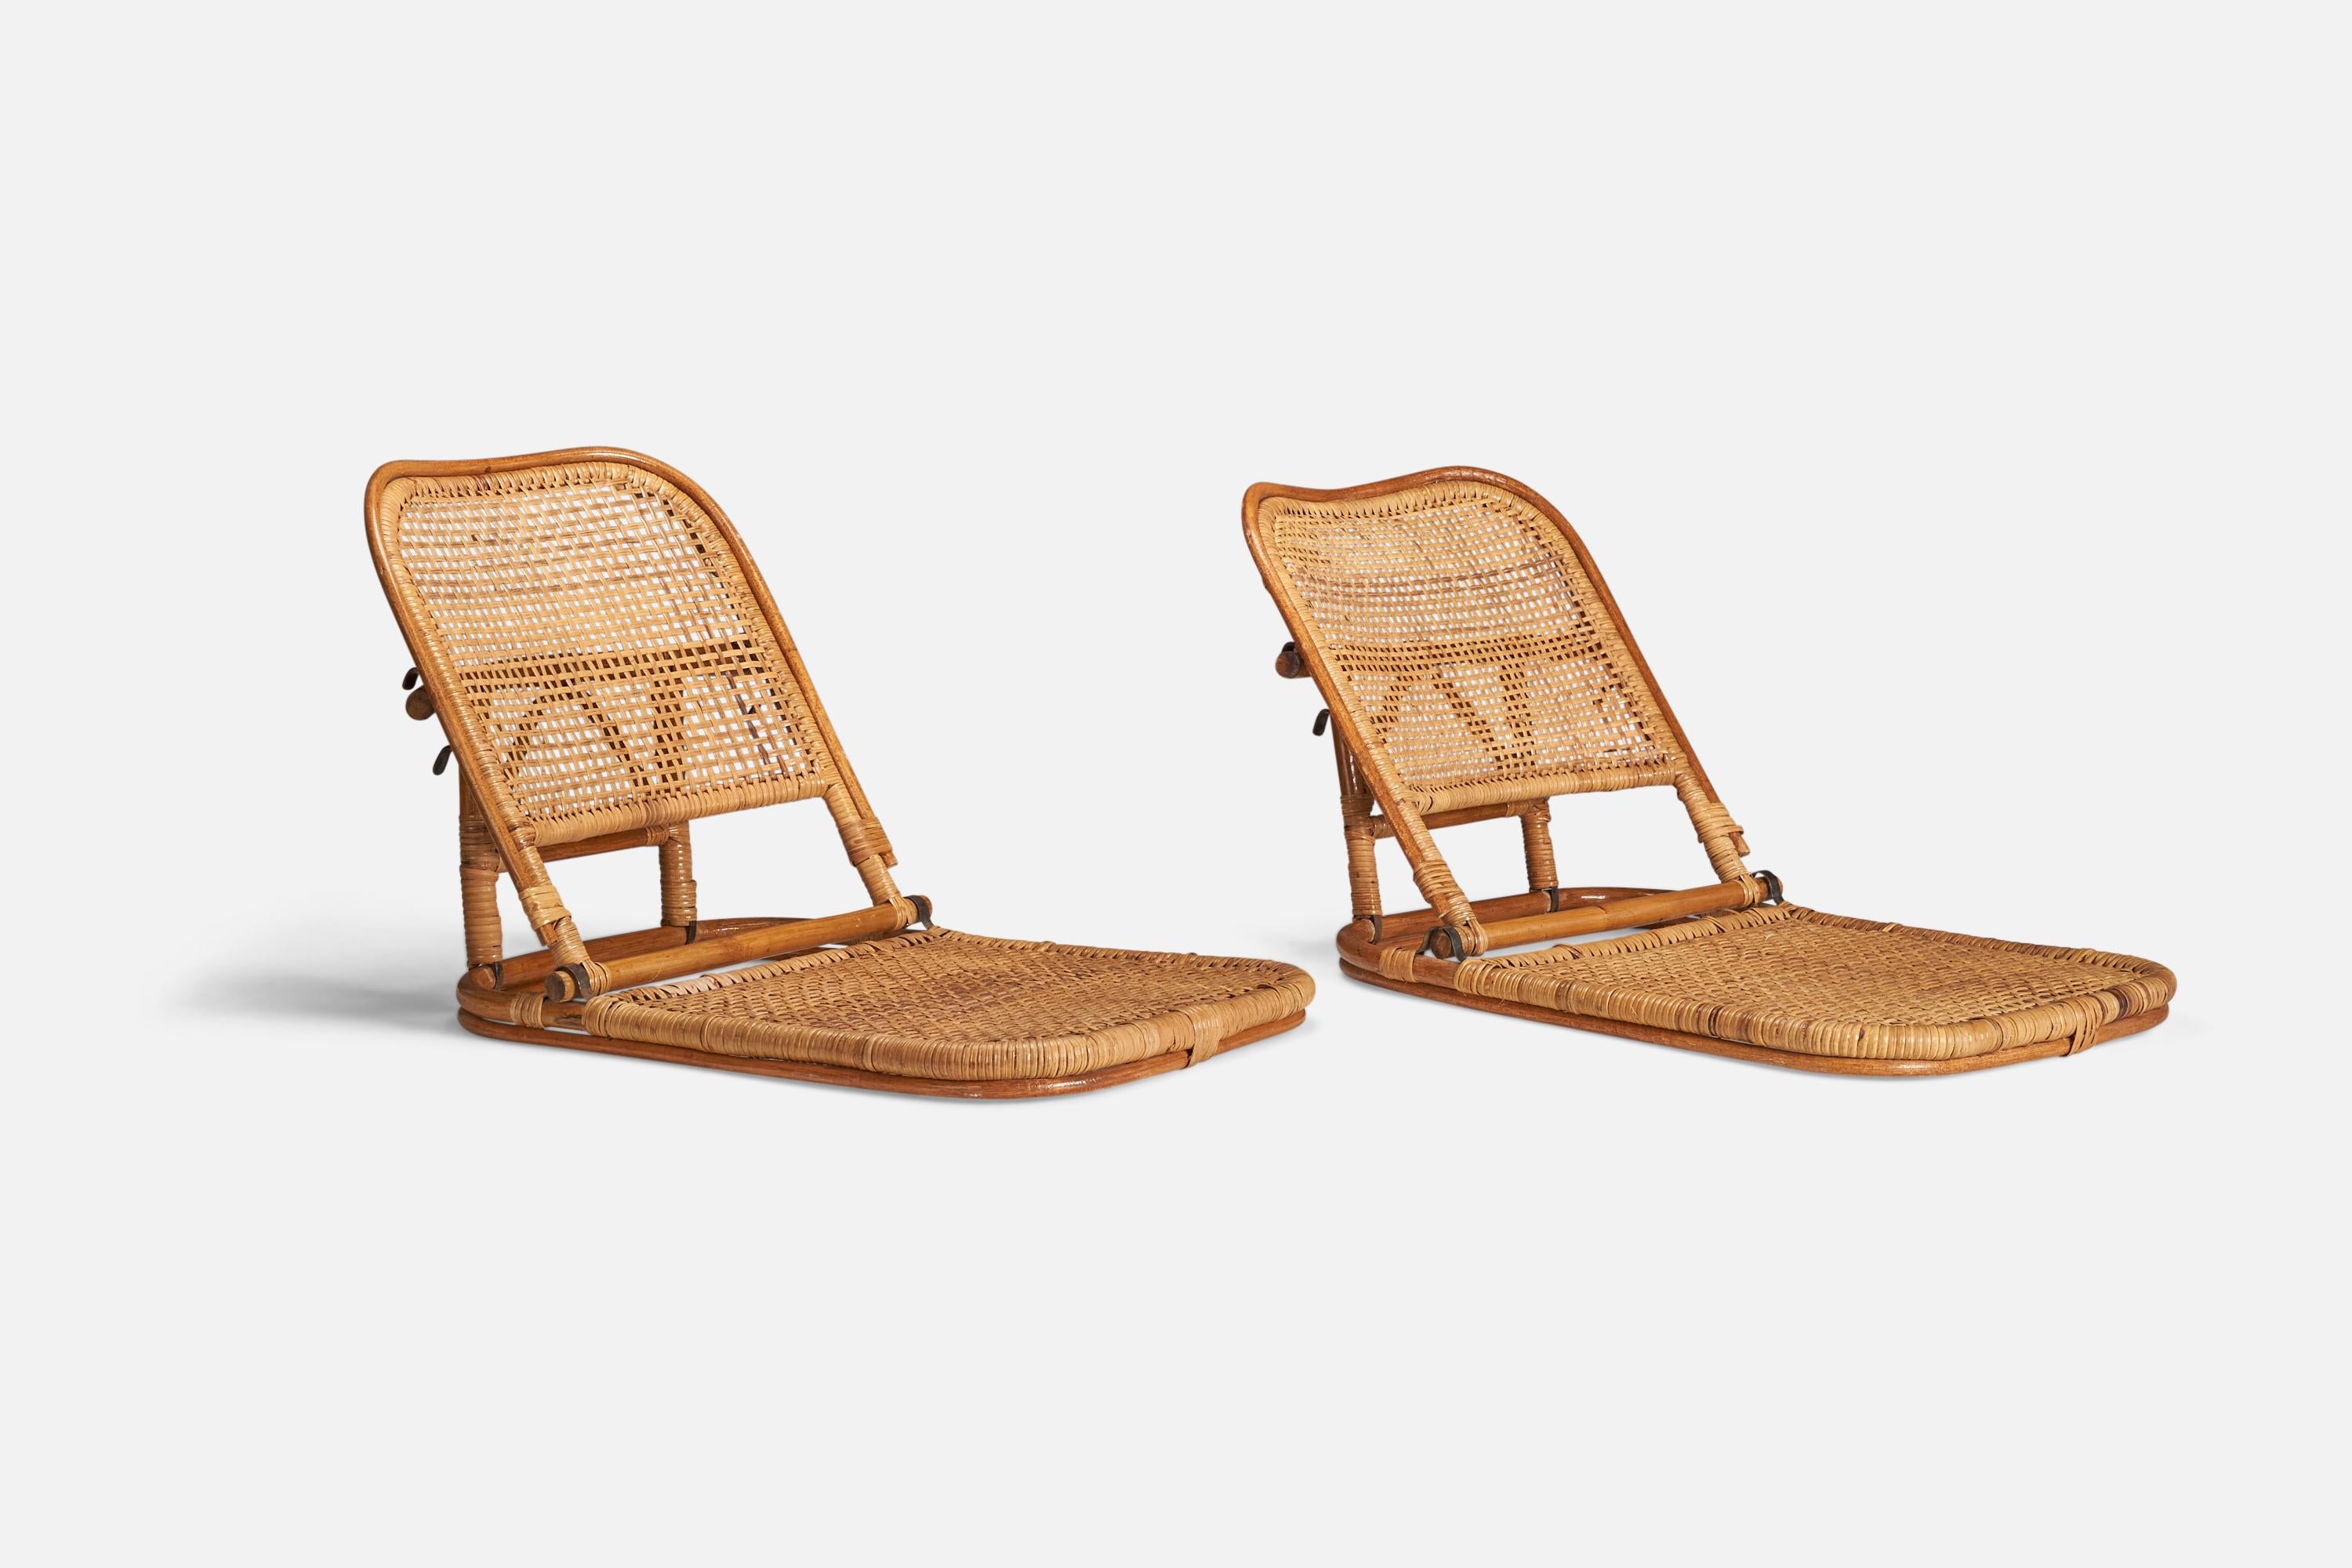 A pair of bamboo, rattan and metal folding lounge chairs designed and produced in the USA, 1950s.

Measurements listed are of chair in its most upright position.

Measurements of the chair in its most reclined position (inches) : 16.37 x 17.87 x